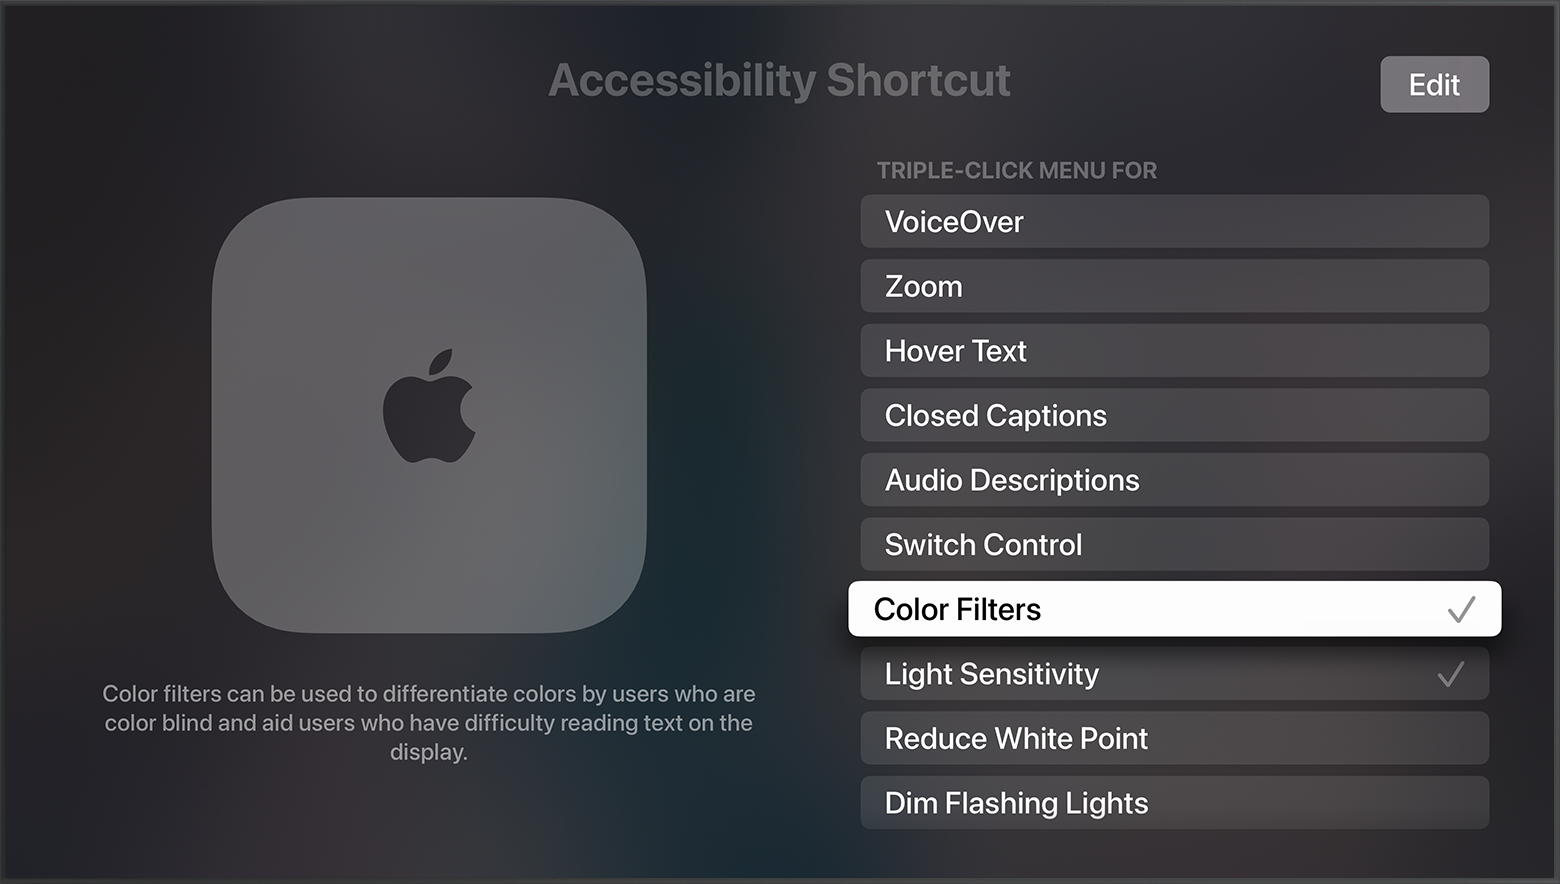 Color Filters appears selected on the Accessibility Shortcut menu